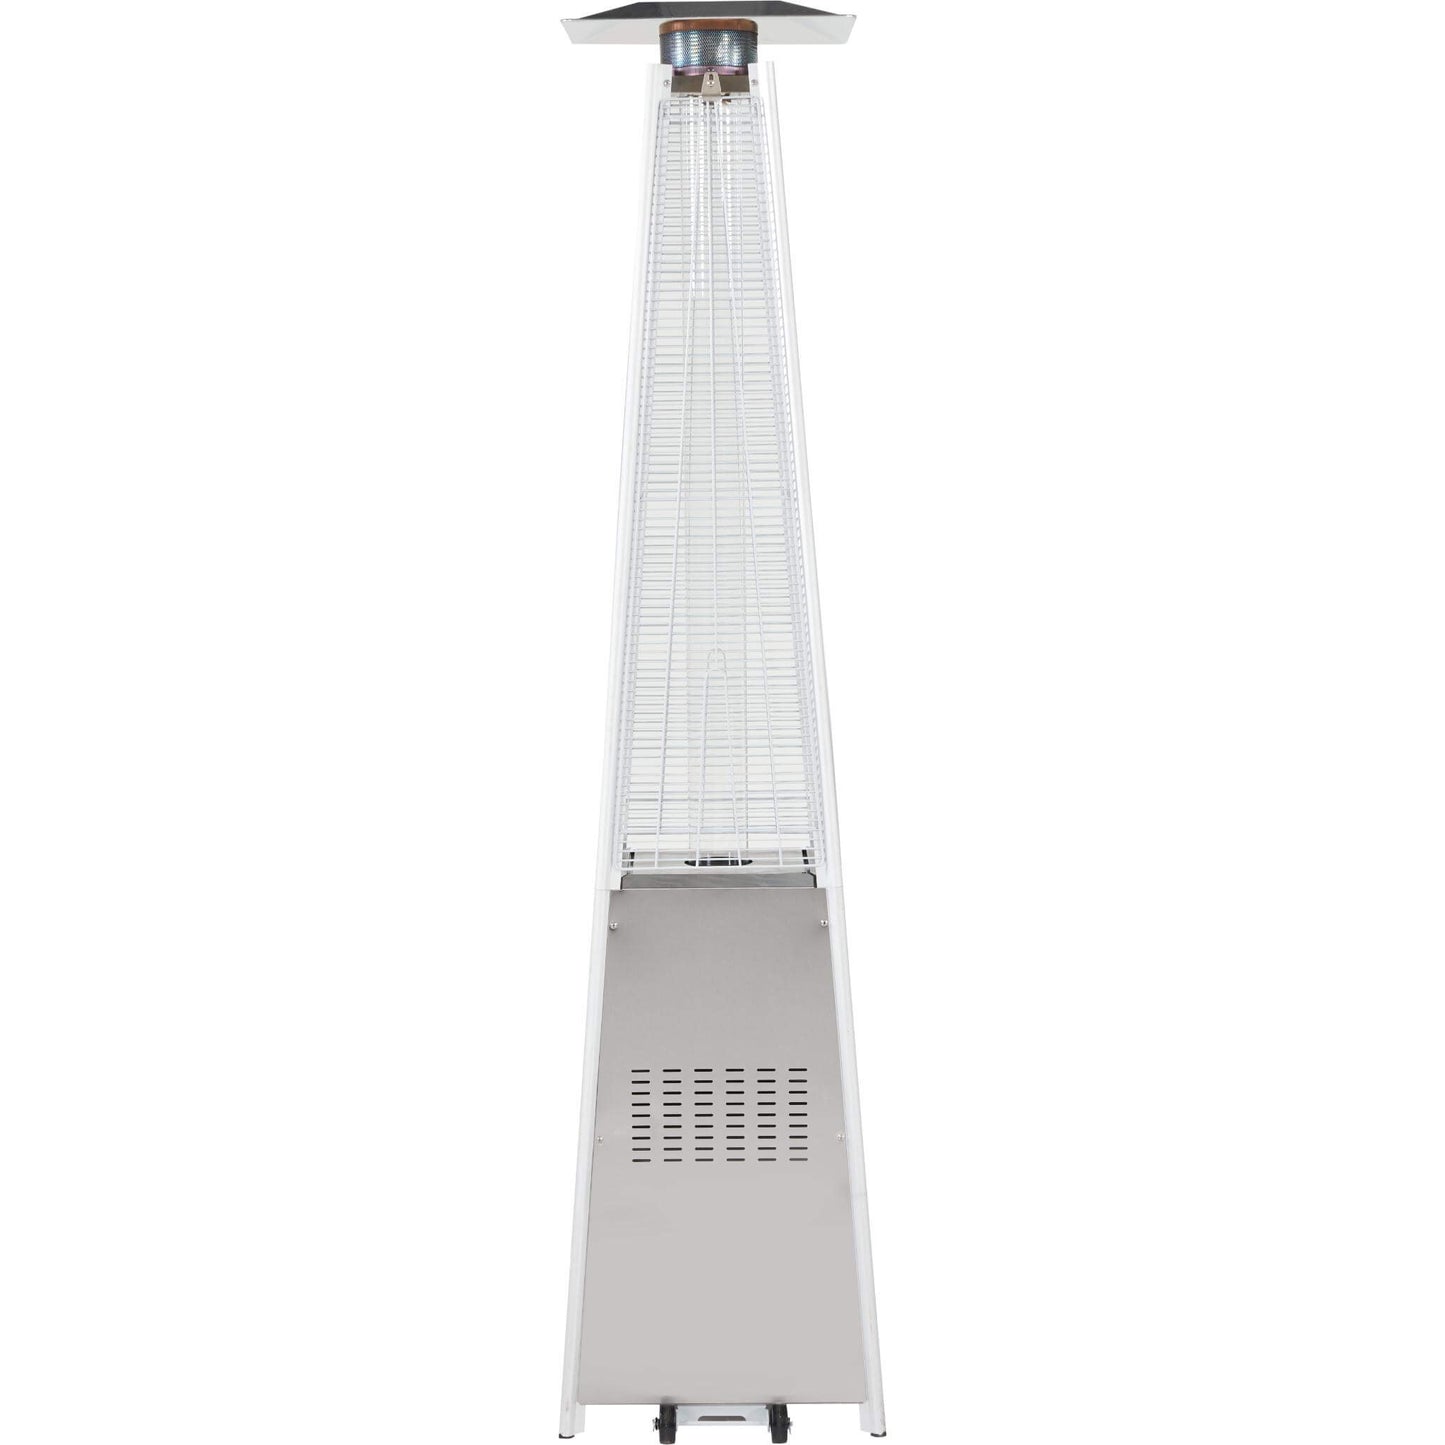 Stainless Steel Quadrilateral Propane Gas Patio Heater